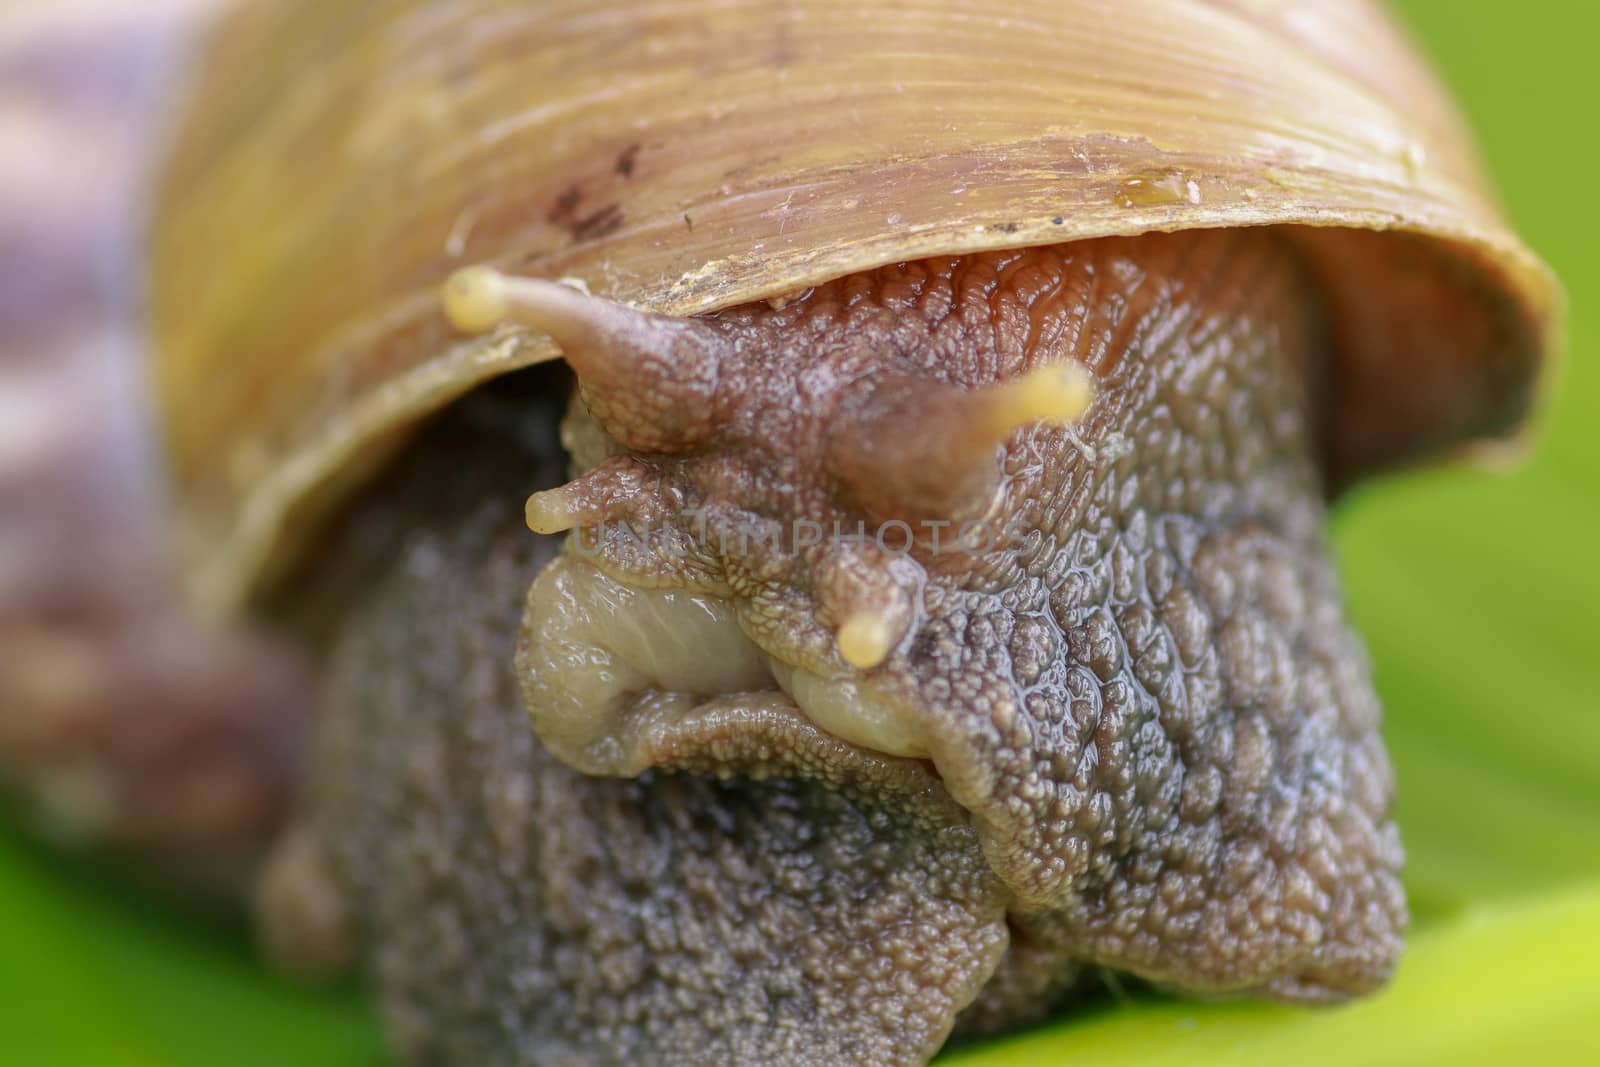 Close up of snail in the rainforest southeast asia. Front view of Achatina Fulica. A large adult snail climbs on a banana leaf in a tropical rainforest.